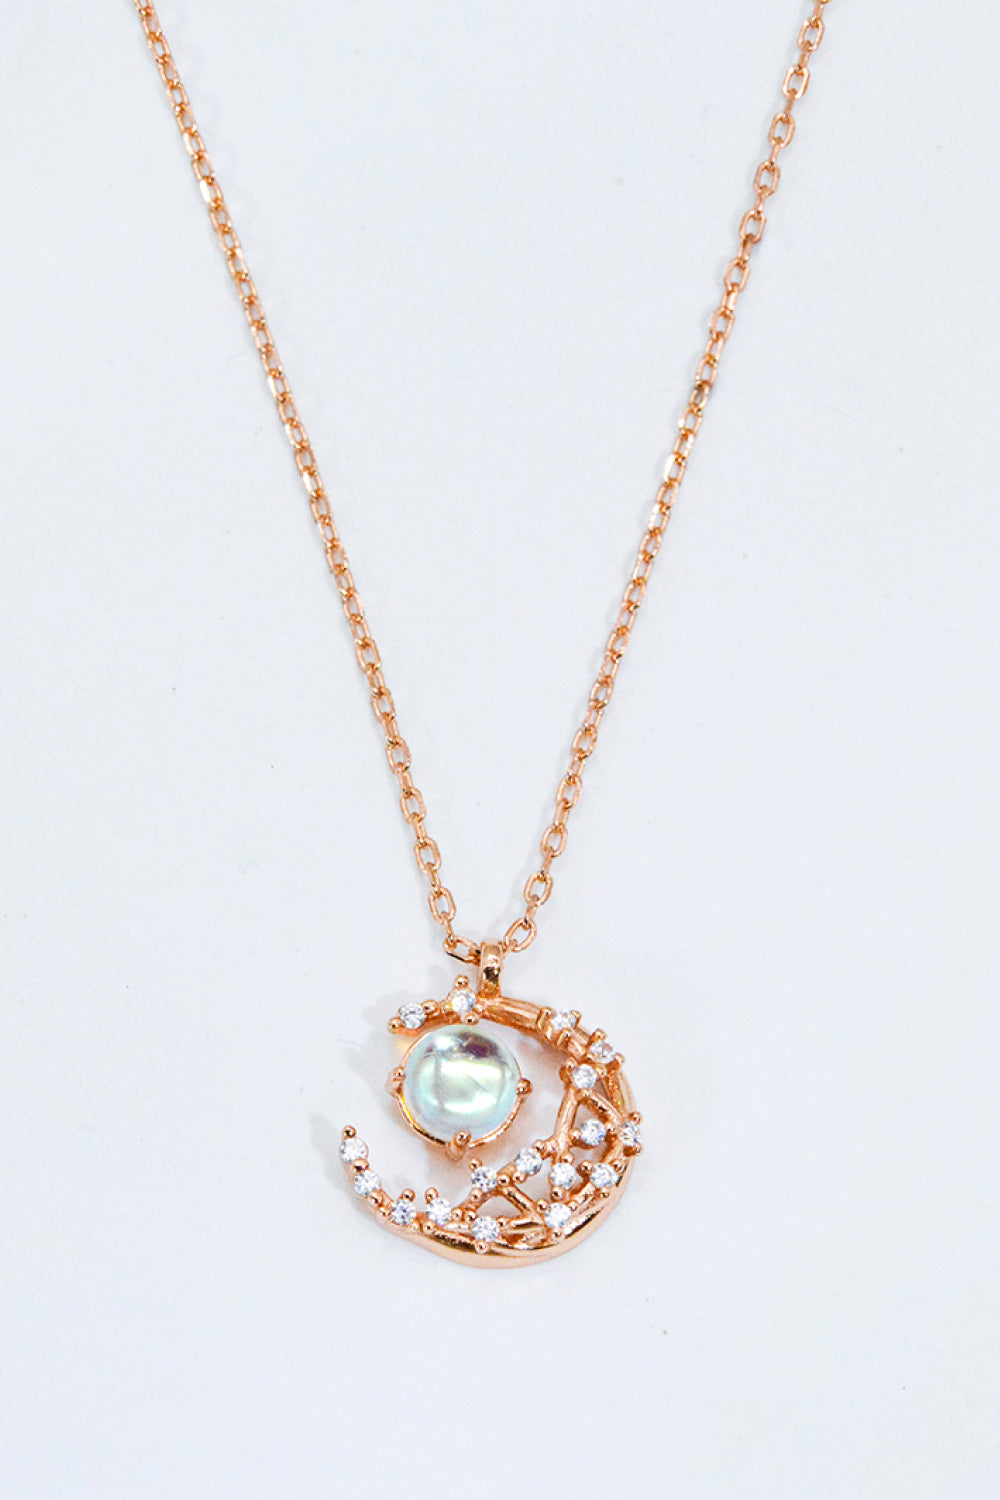 Where It All Began Moonstone Necklace-Necklaces-Inspired by Justeen-Women's Clothing Boutique in Chicago, Illinois